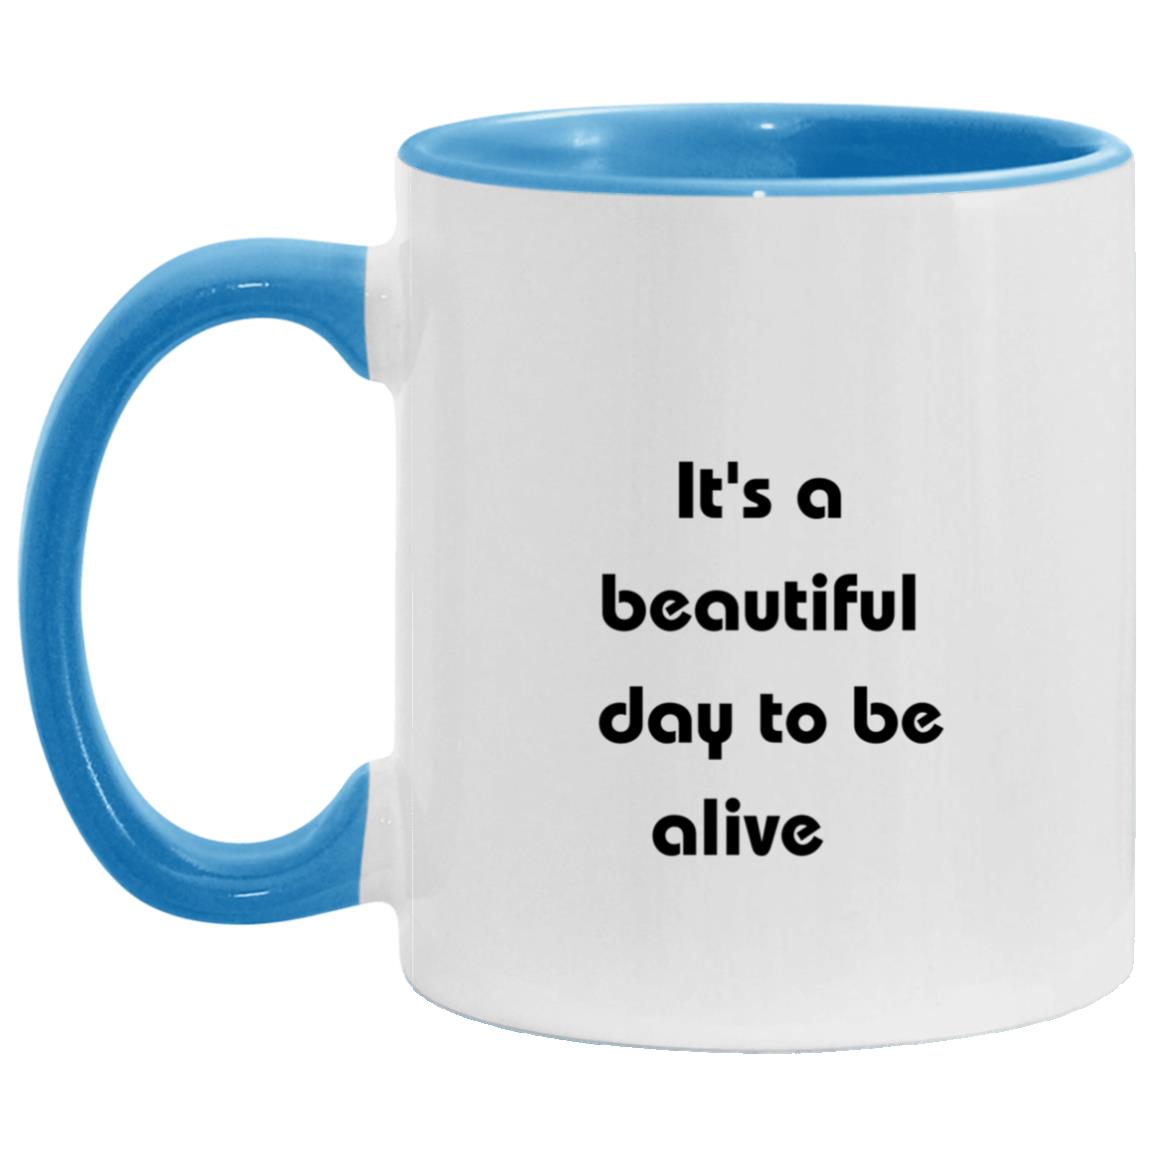 It's a beautiful day to leave me alone Accent Mug| Best Selling Item| Mom| Girlfriend| Wife| Mother's day Gift| Partner| Trending